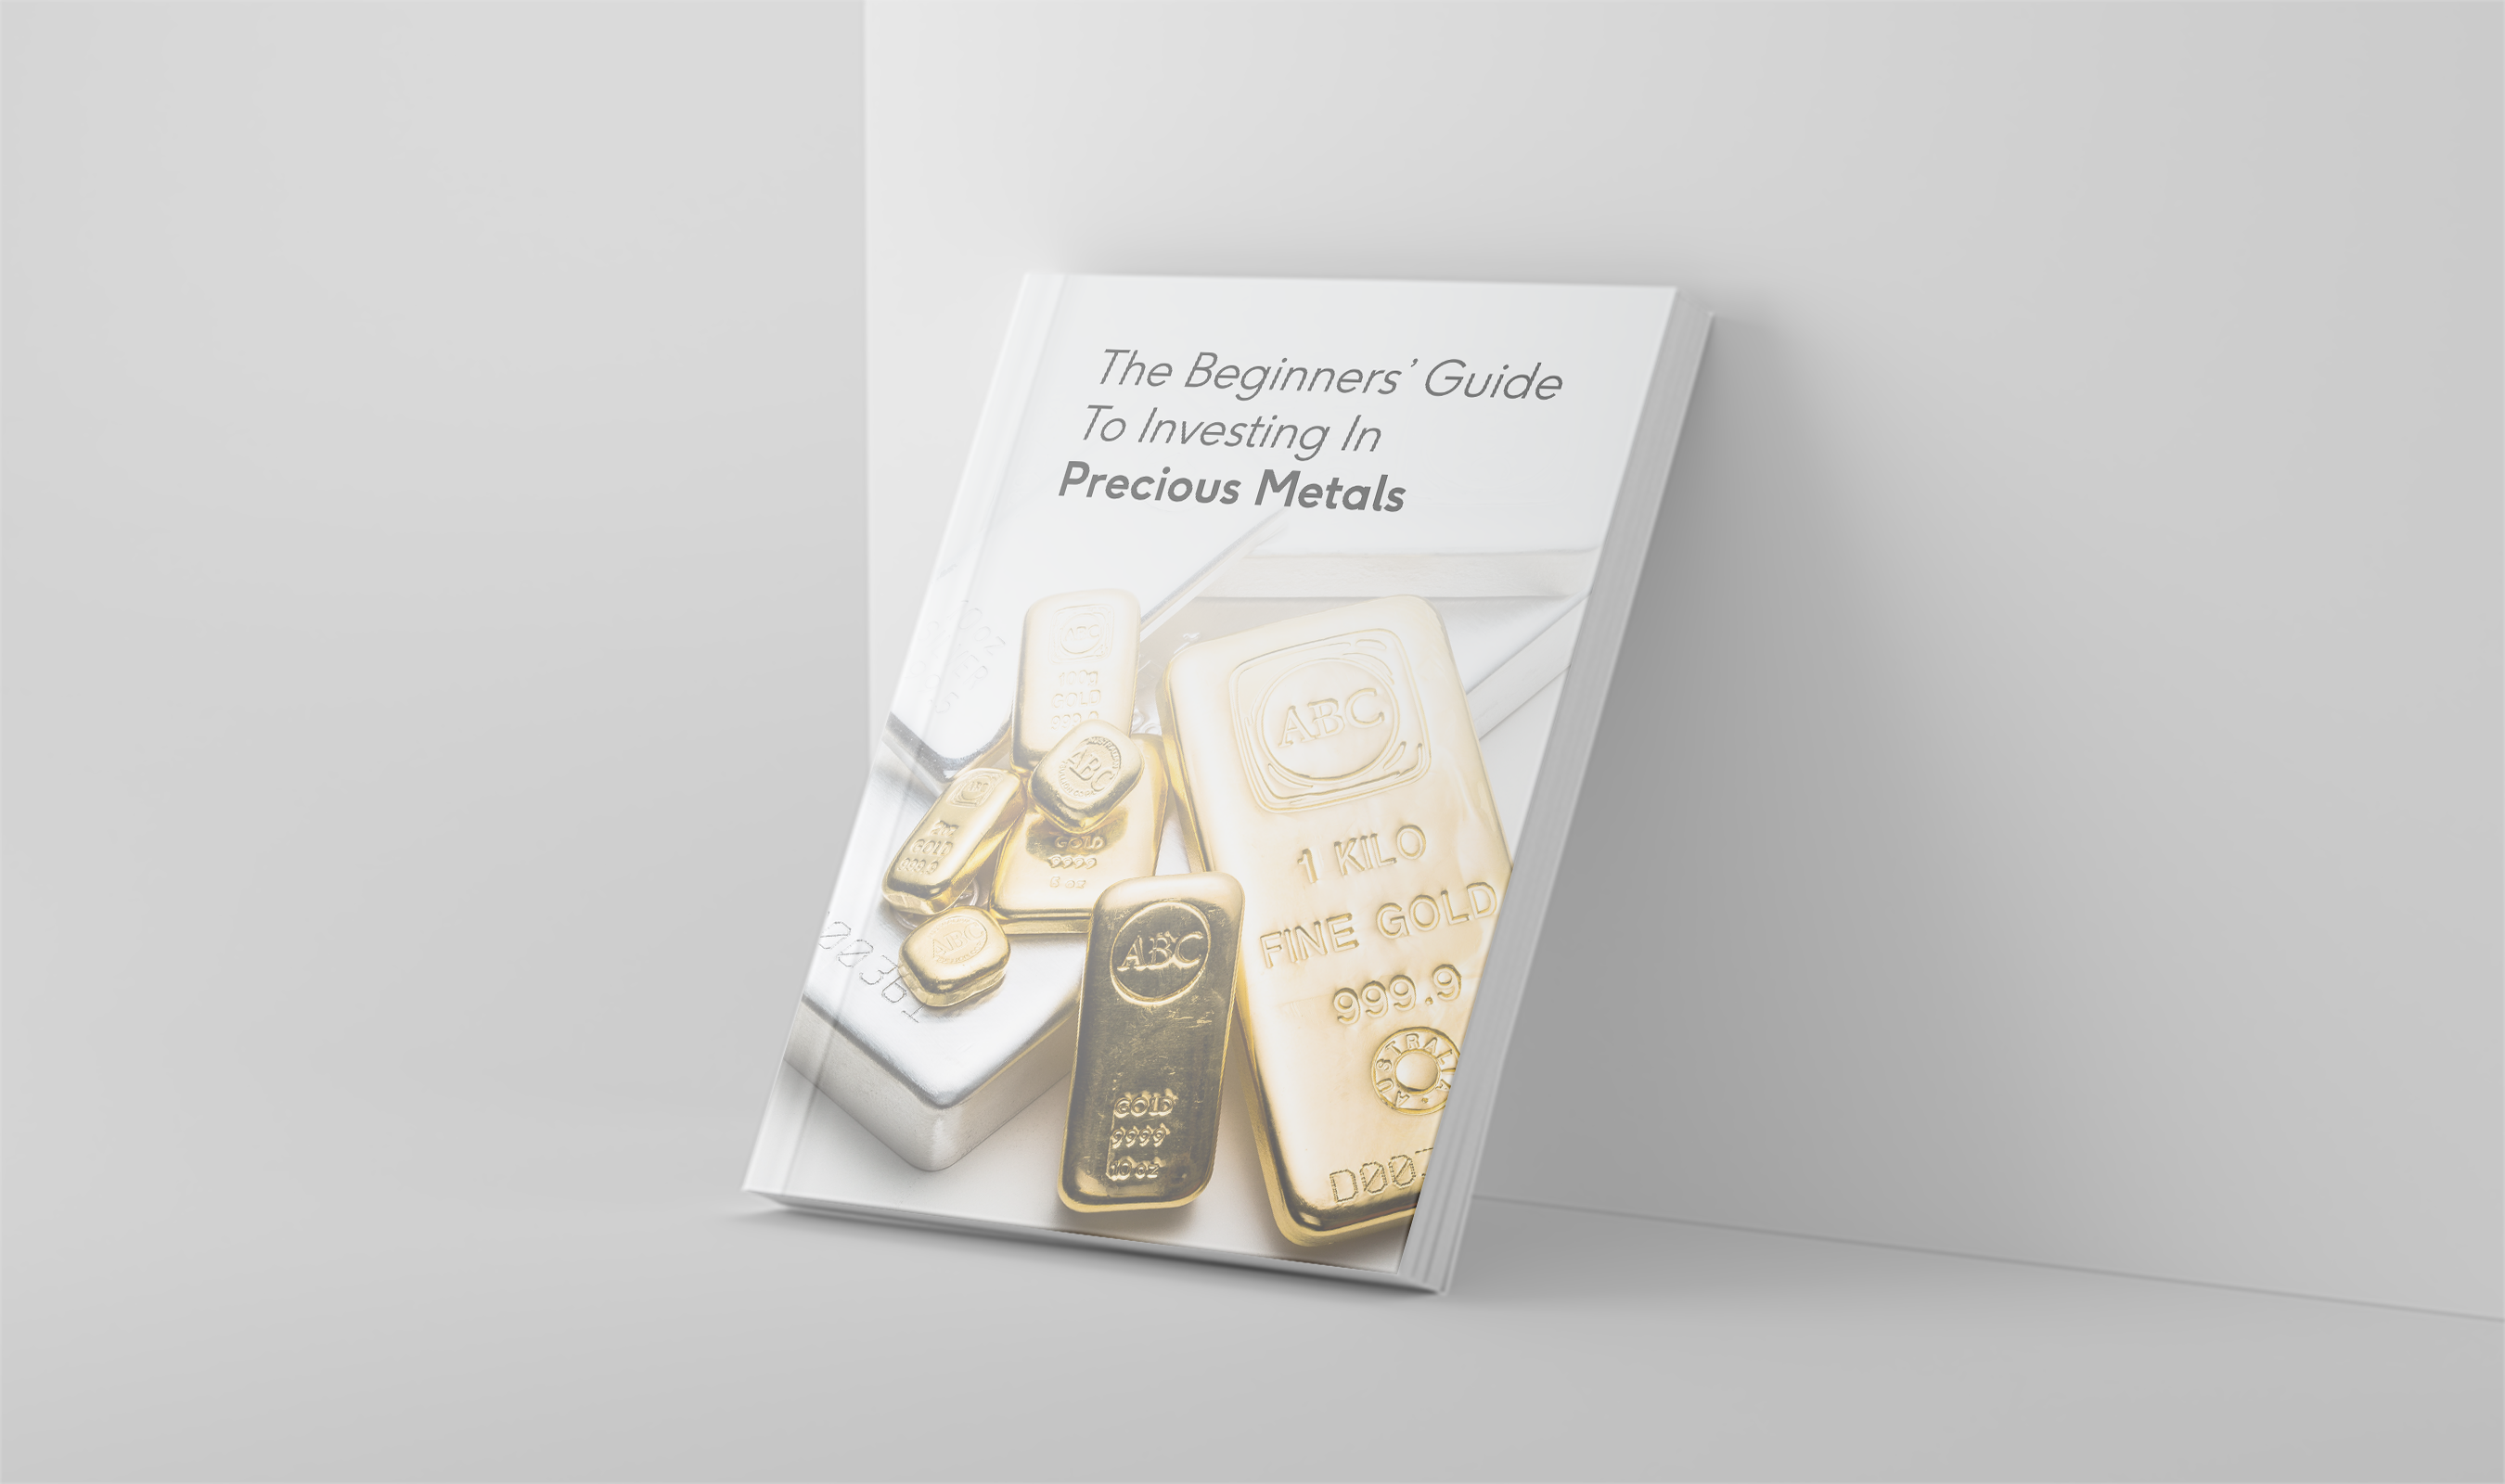 The Beginners’ Guide to Investing in Precious Metals